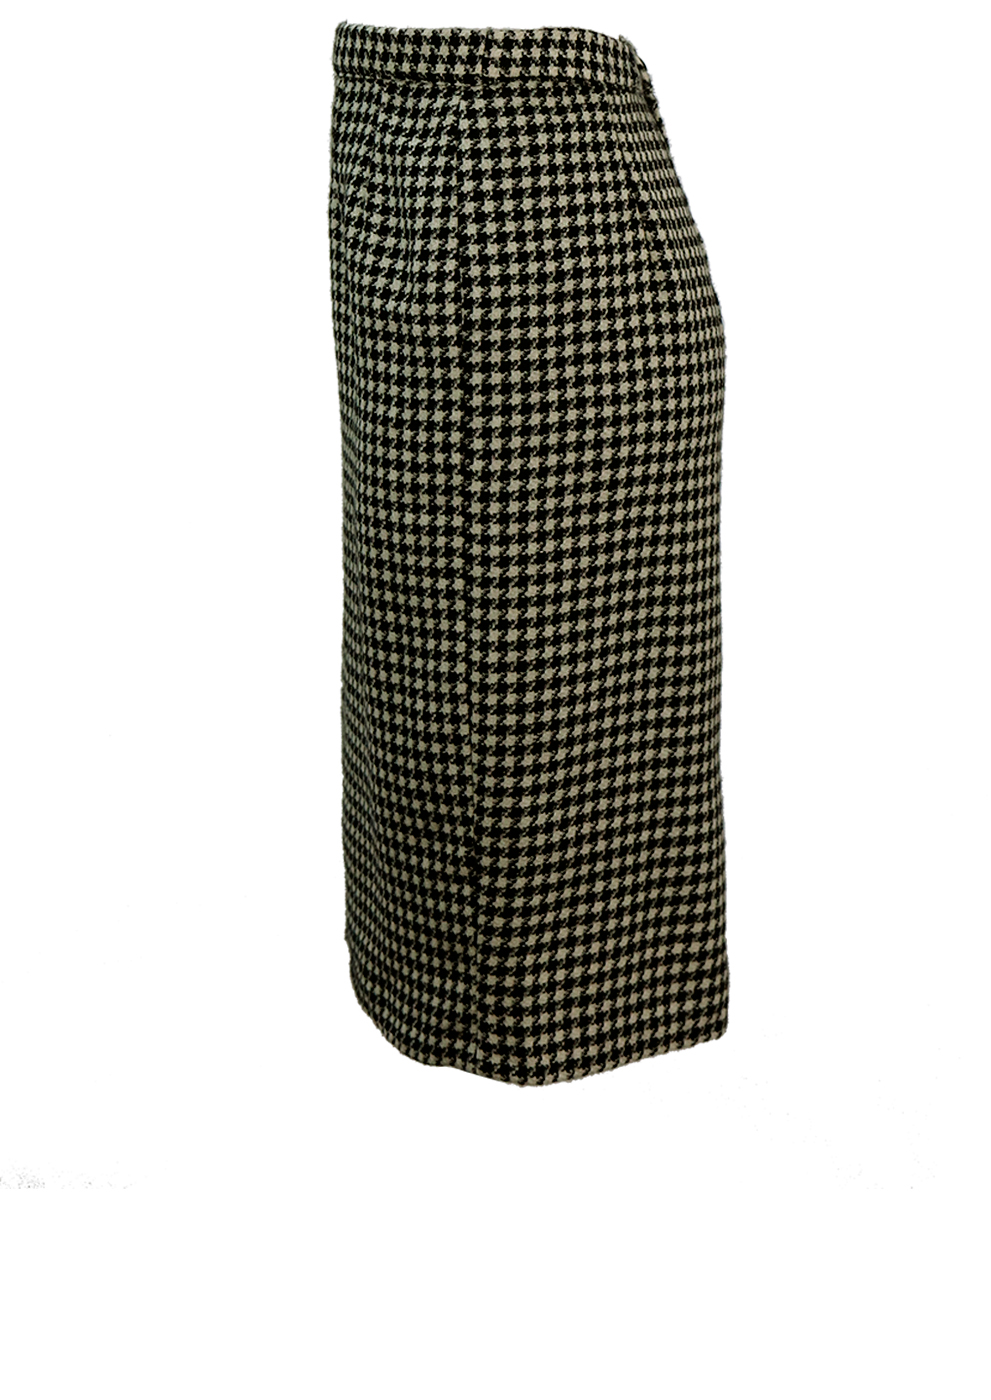 Jacket & Skirt Two Piece Suit with Black & White Dogtooth Check - M/L ...